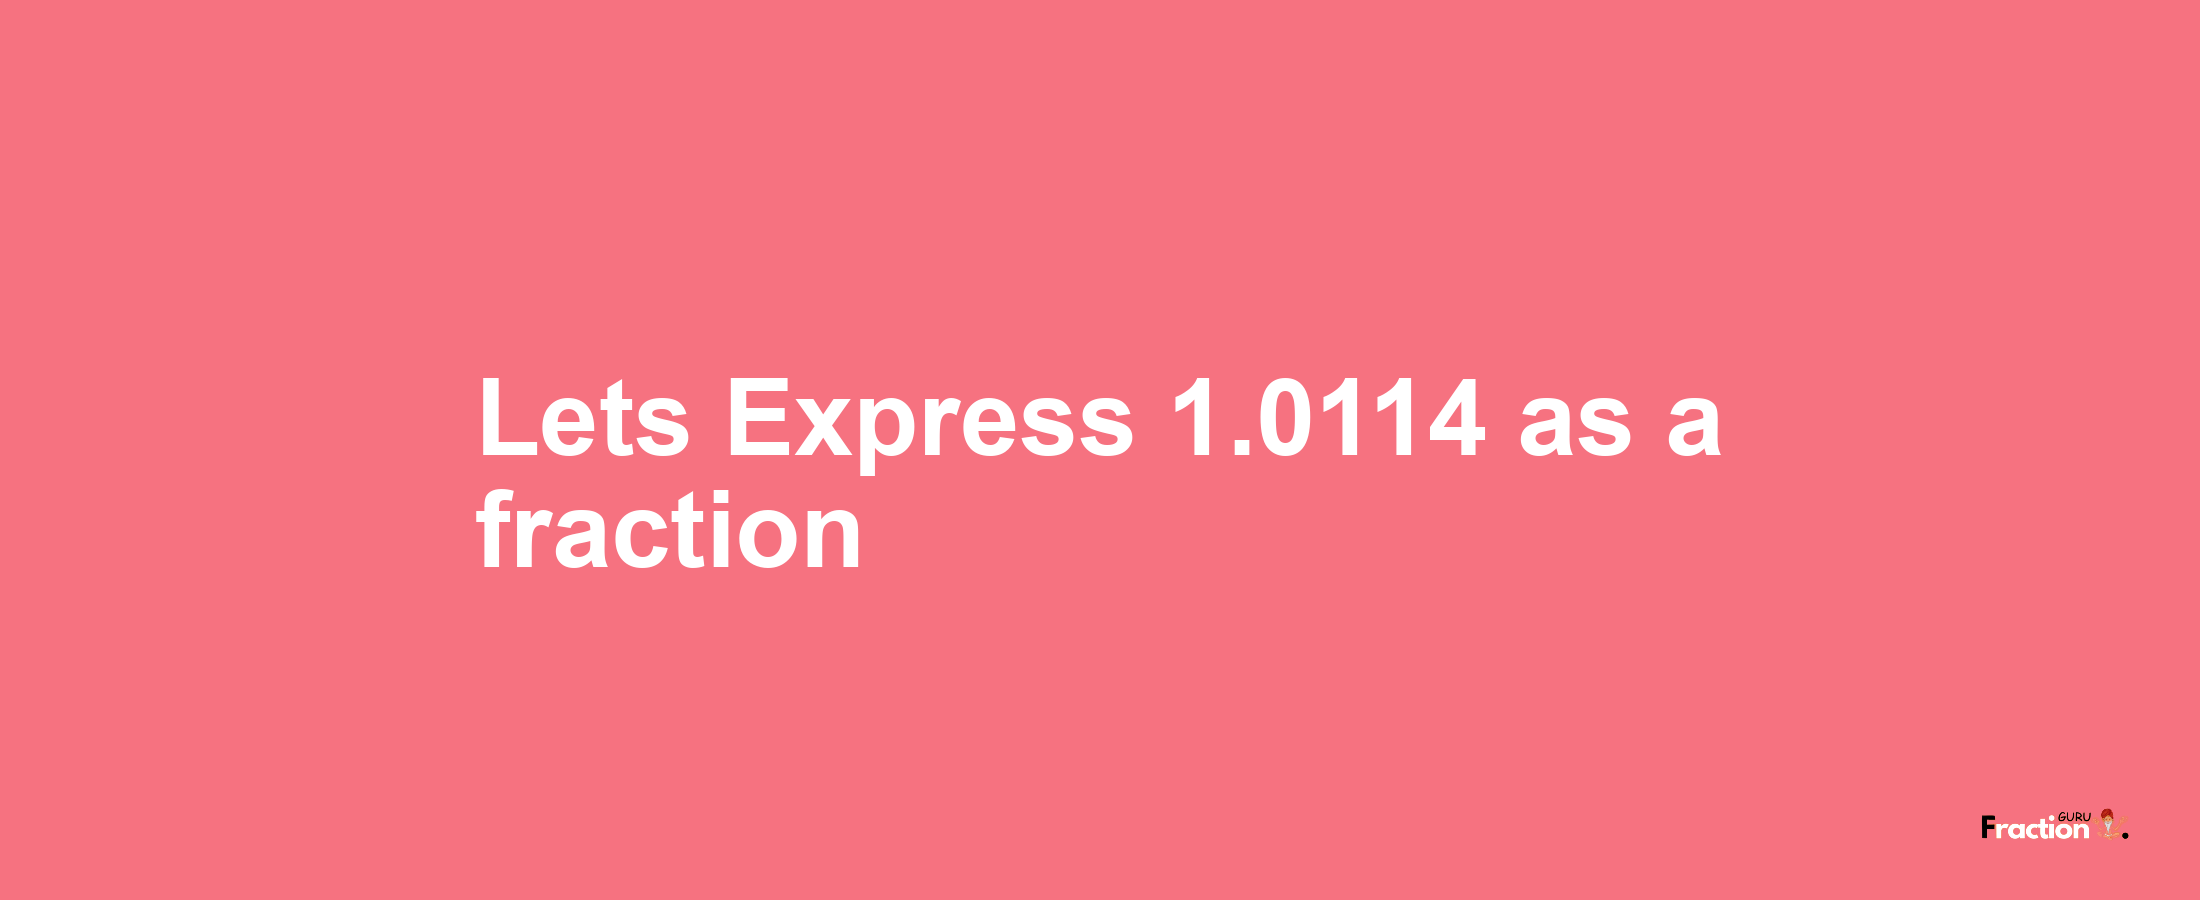 Lets Express 1.0114 as afraction